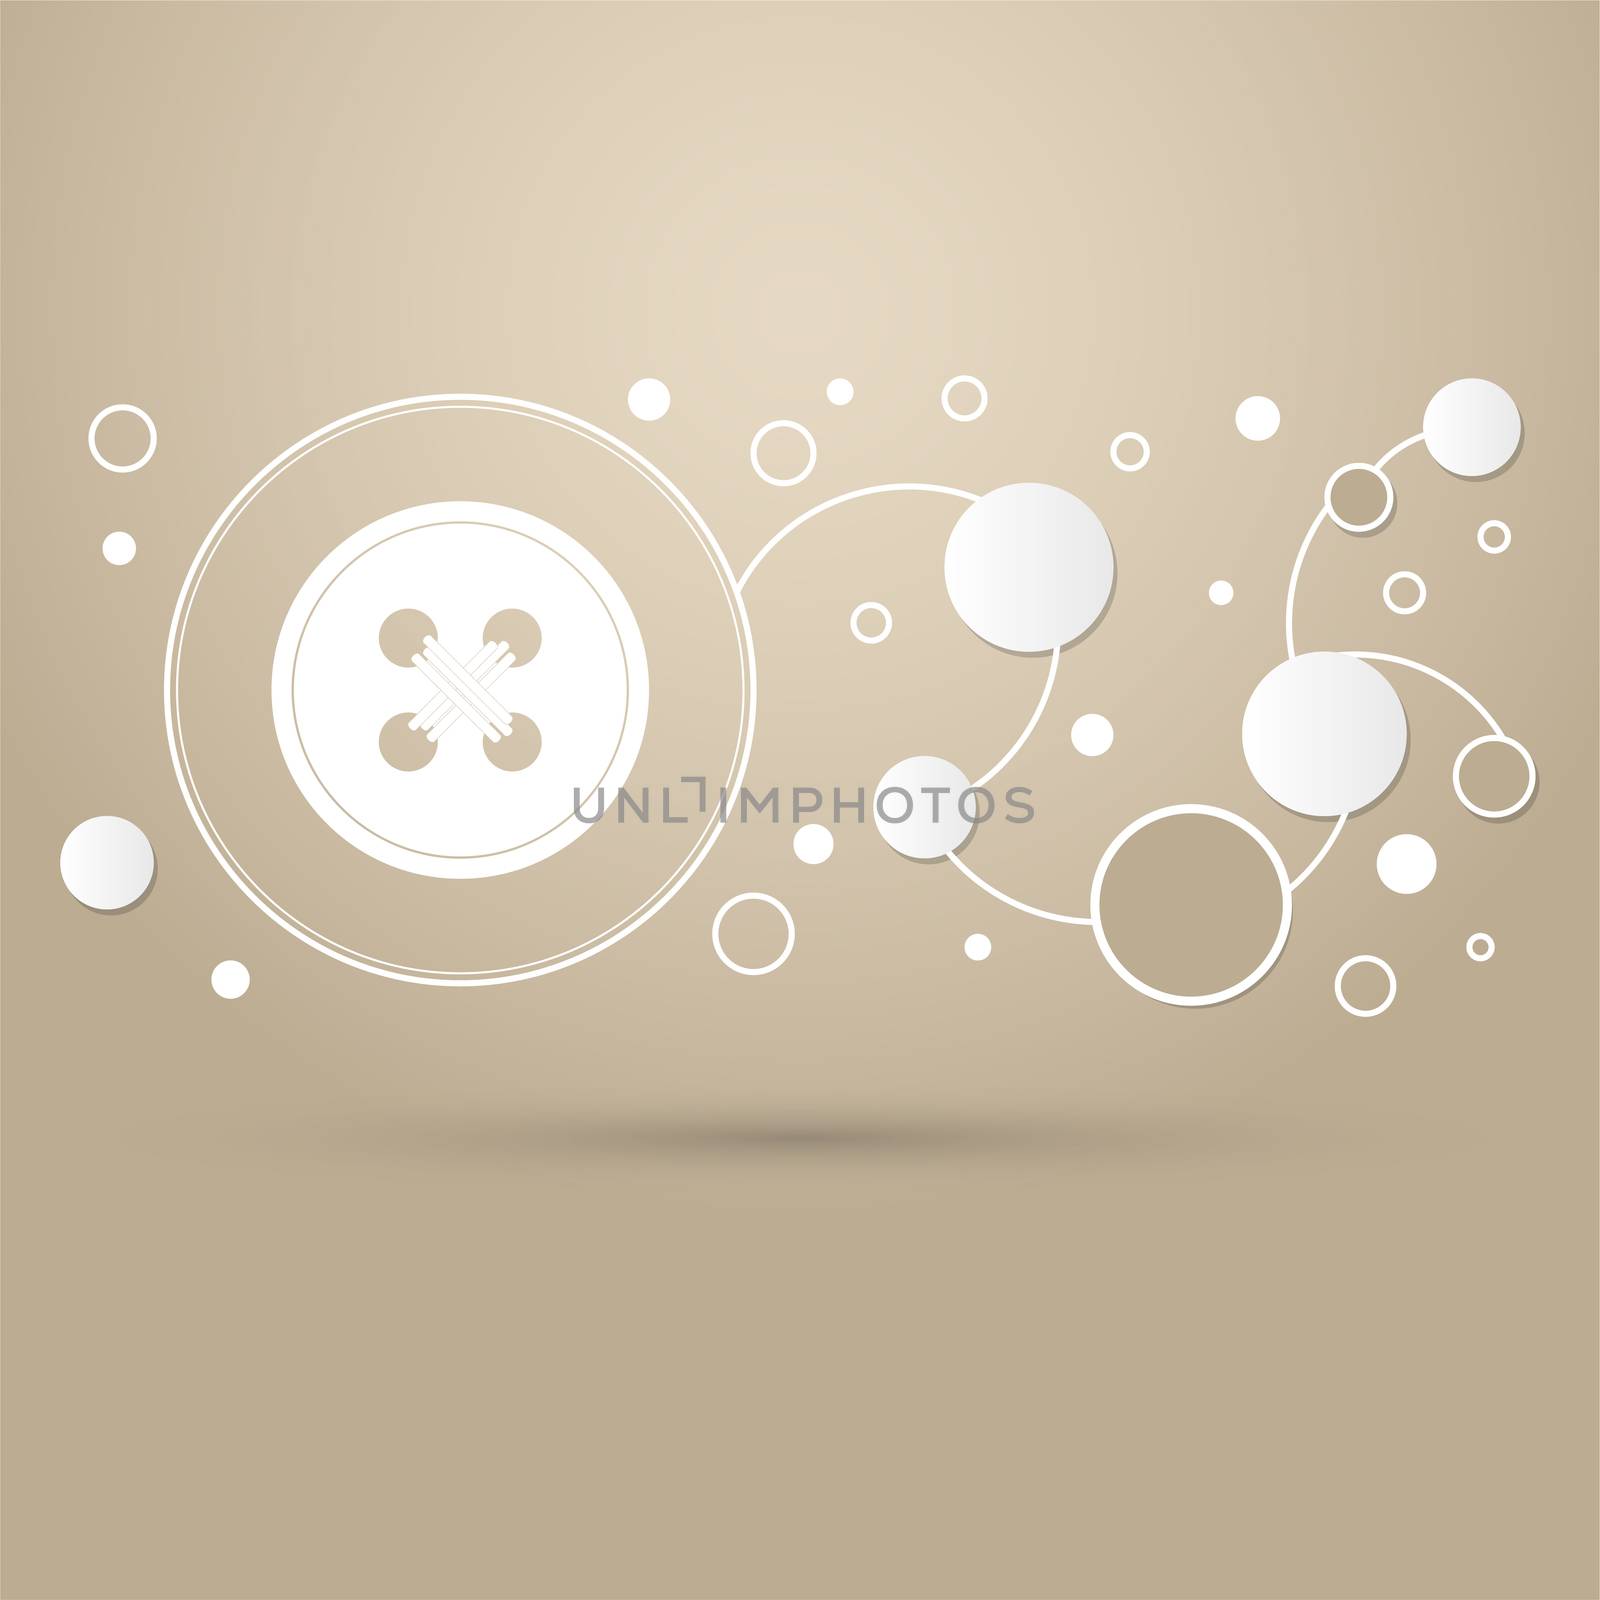 button for clothes icon on a brown background with elegant style and modern design infographic.  by Adamchuk